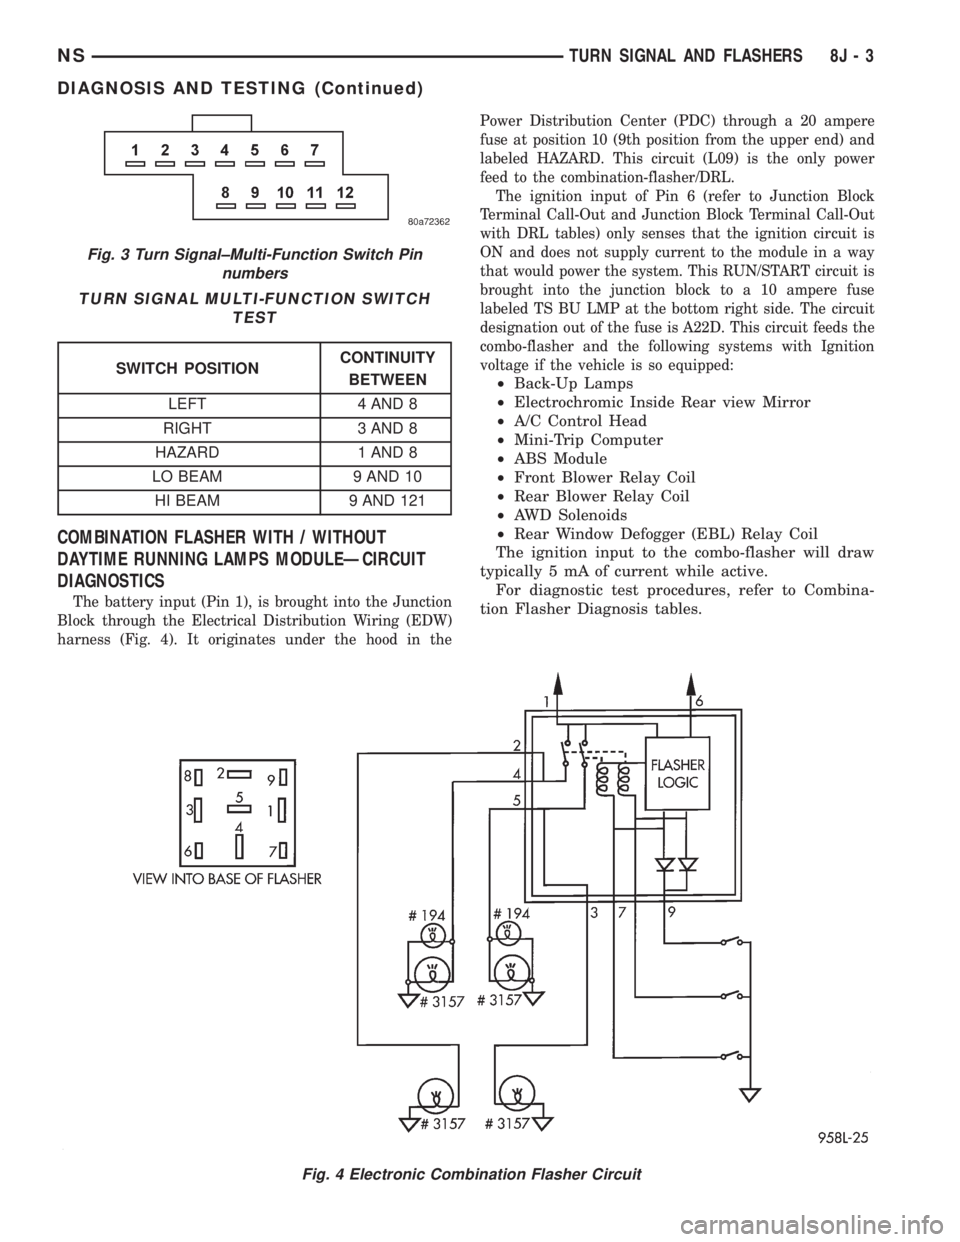 CHRYSLER VOYAGER 1996  Service Manual COMBINATION FLASHER WITH / WITHOUT
DAYTIME RUNNING LAMPS MODULEÐCIRCUIT
DIAGNOSTICS
The battery input (Pin 1), is brought into the Junction
Block through the Electrical Distribution Wiring (EDW)
harn